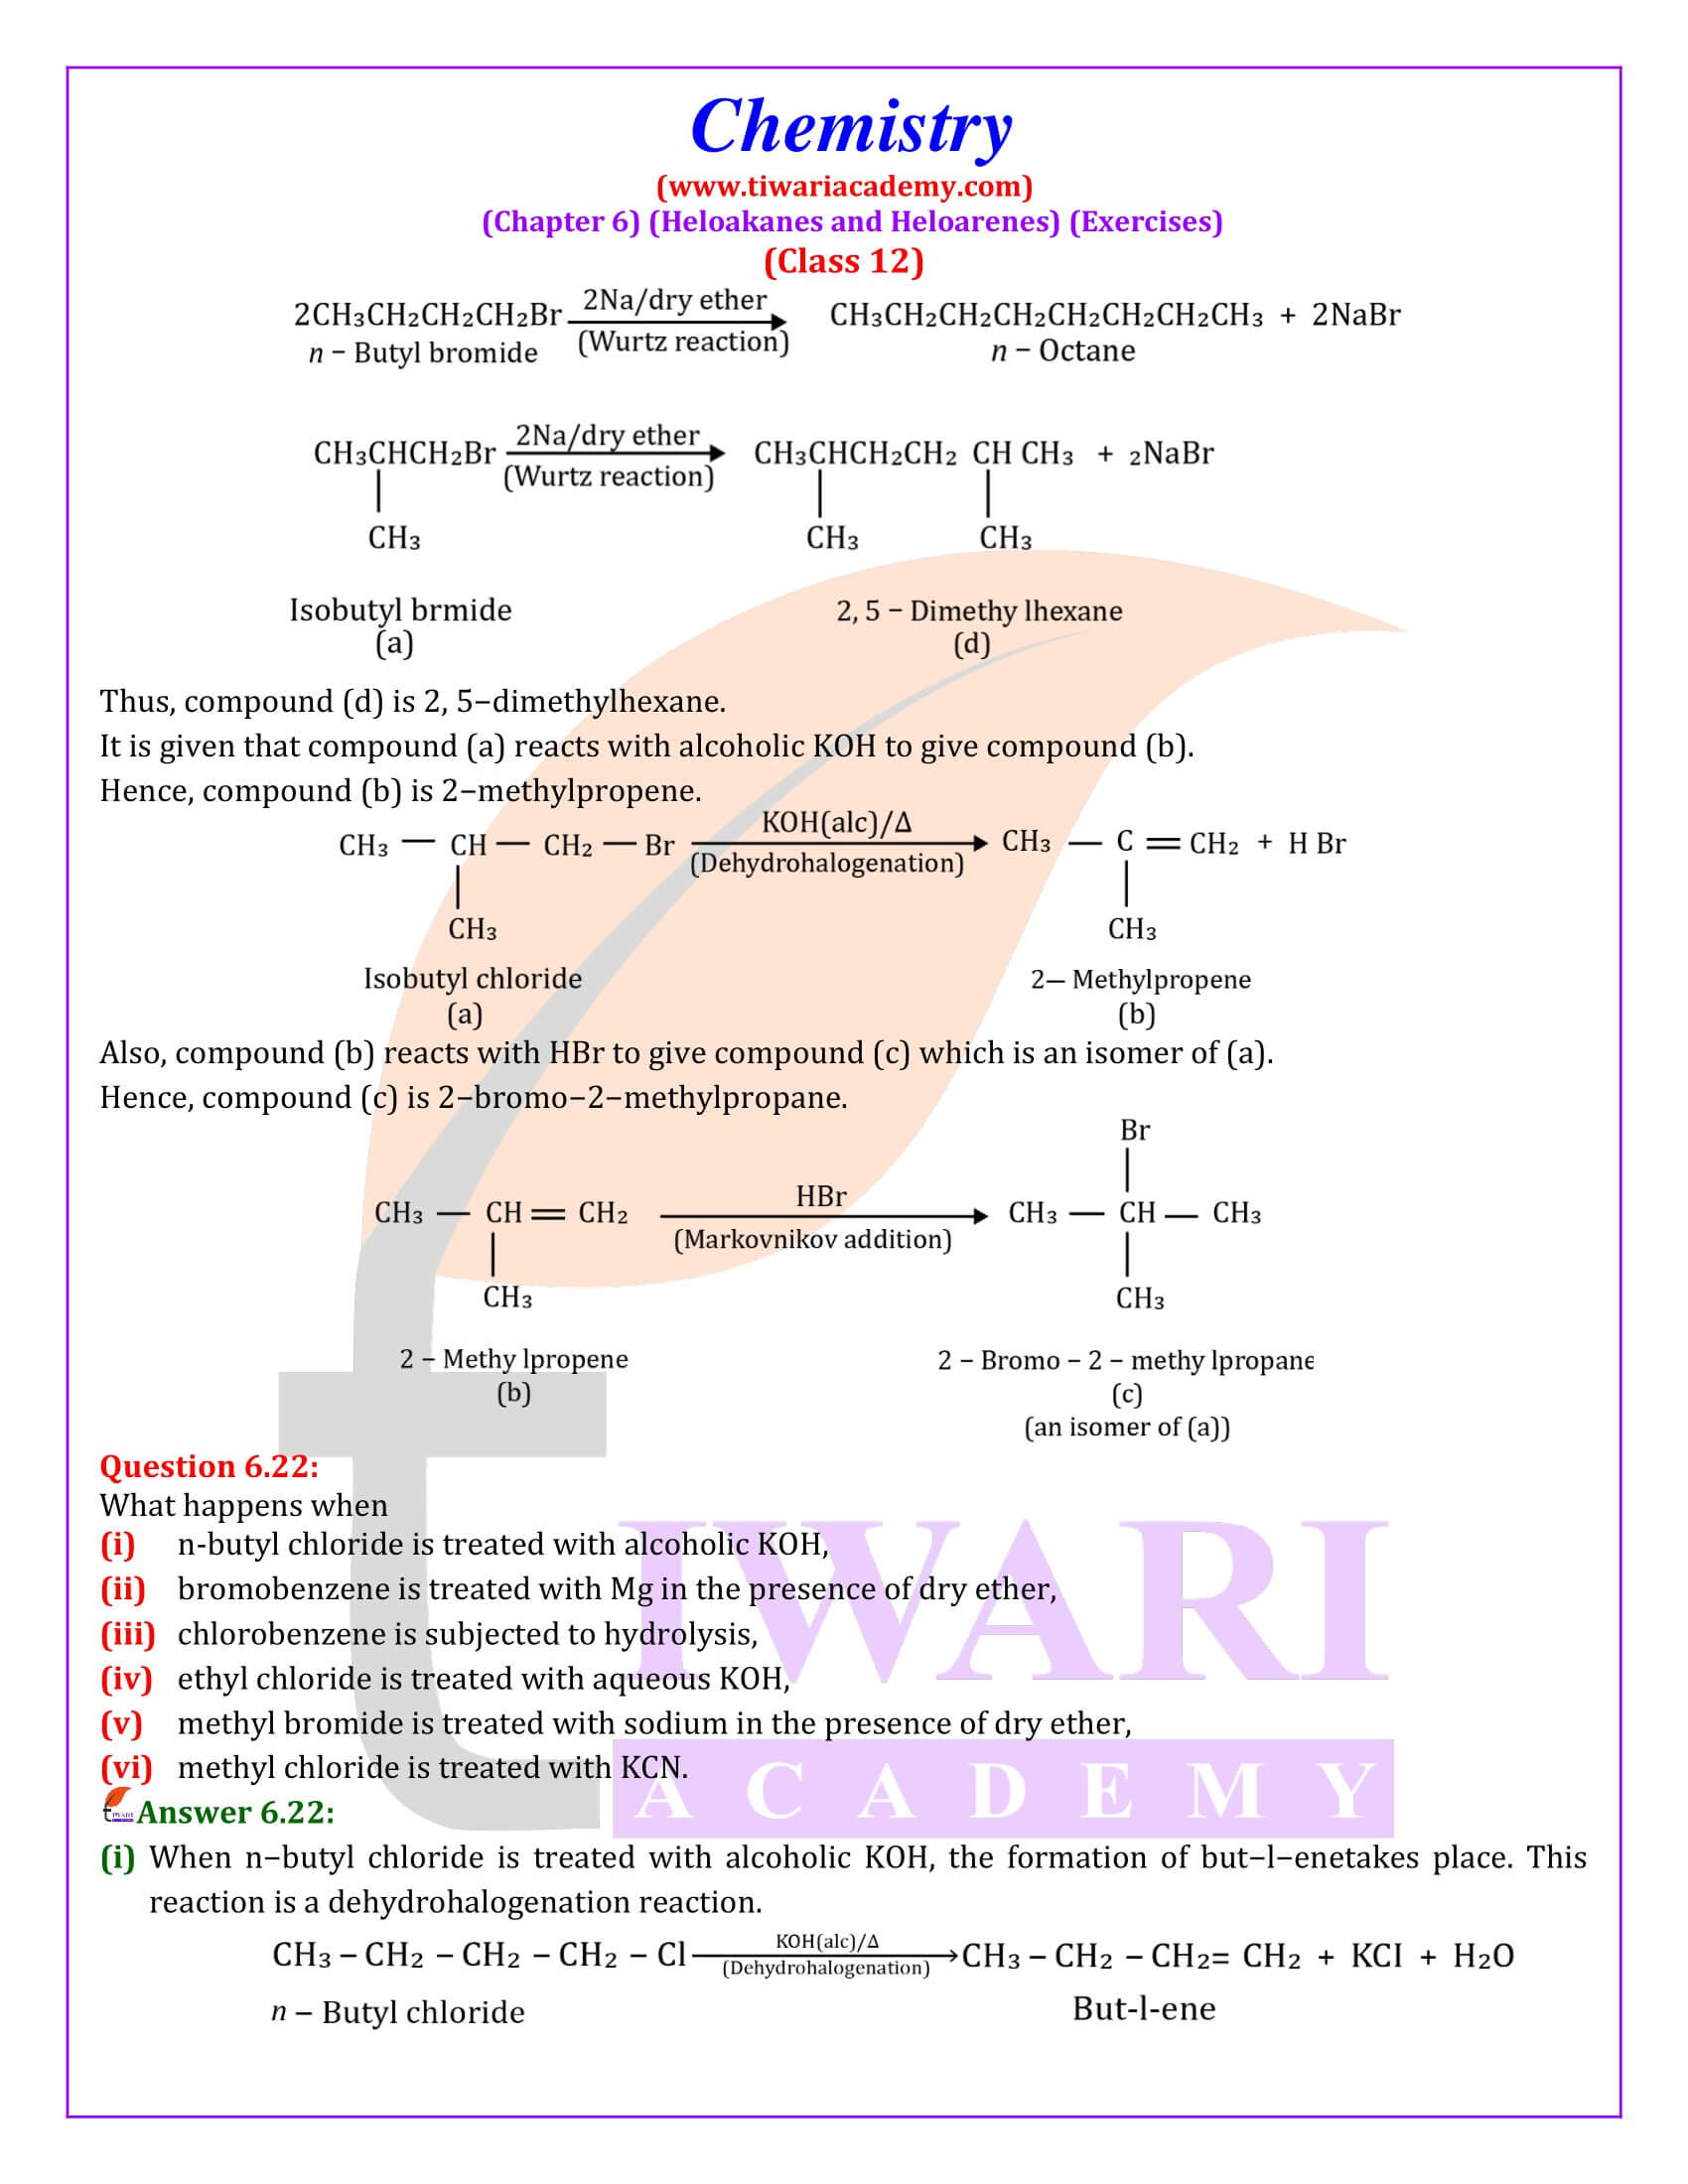 Class 12 Chemistry Chapter 6 free to use